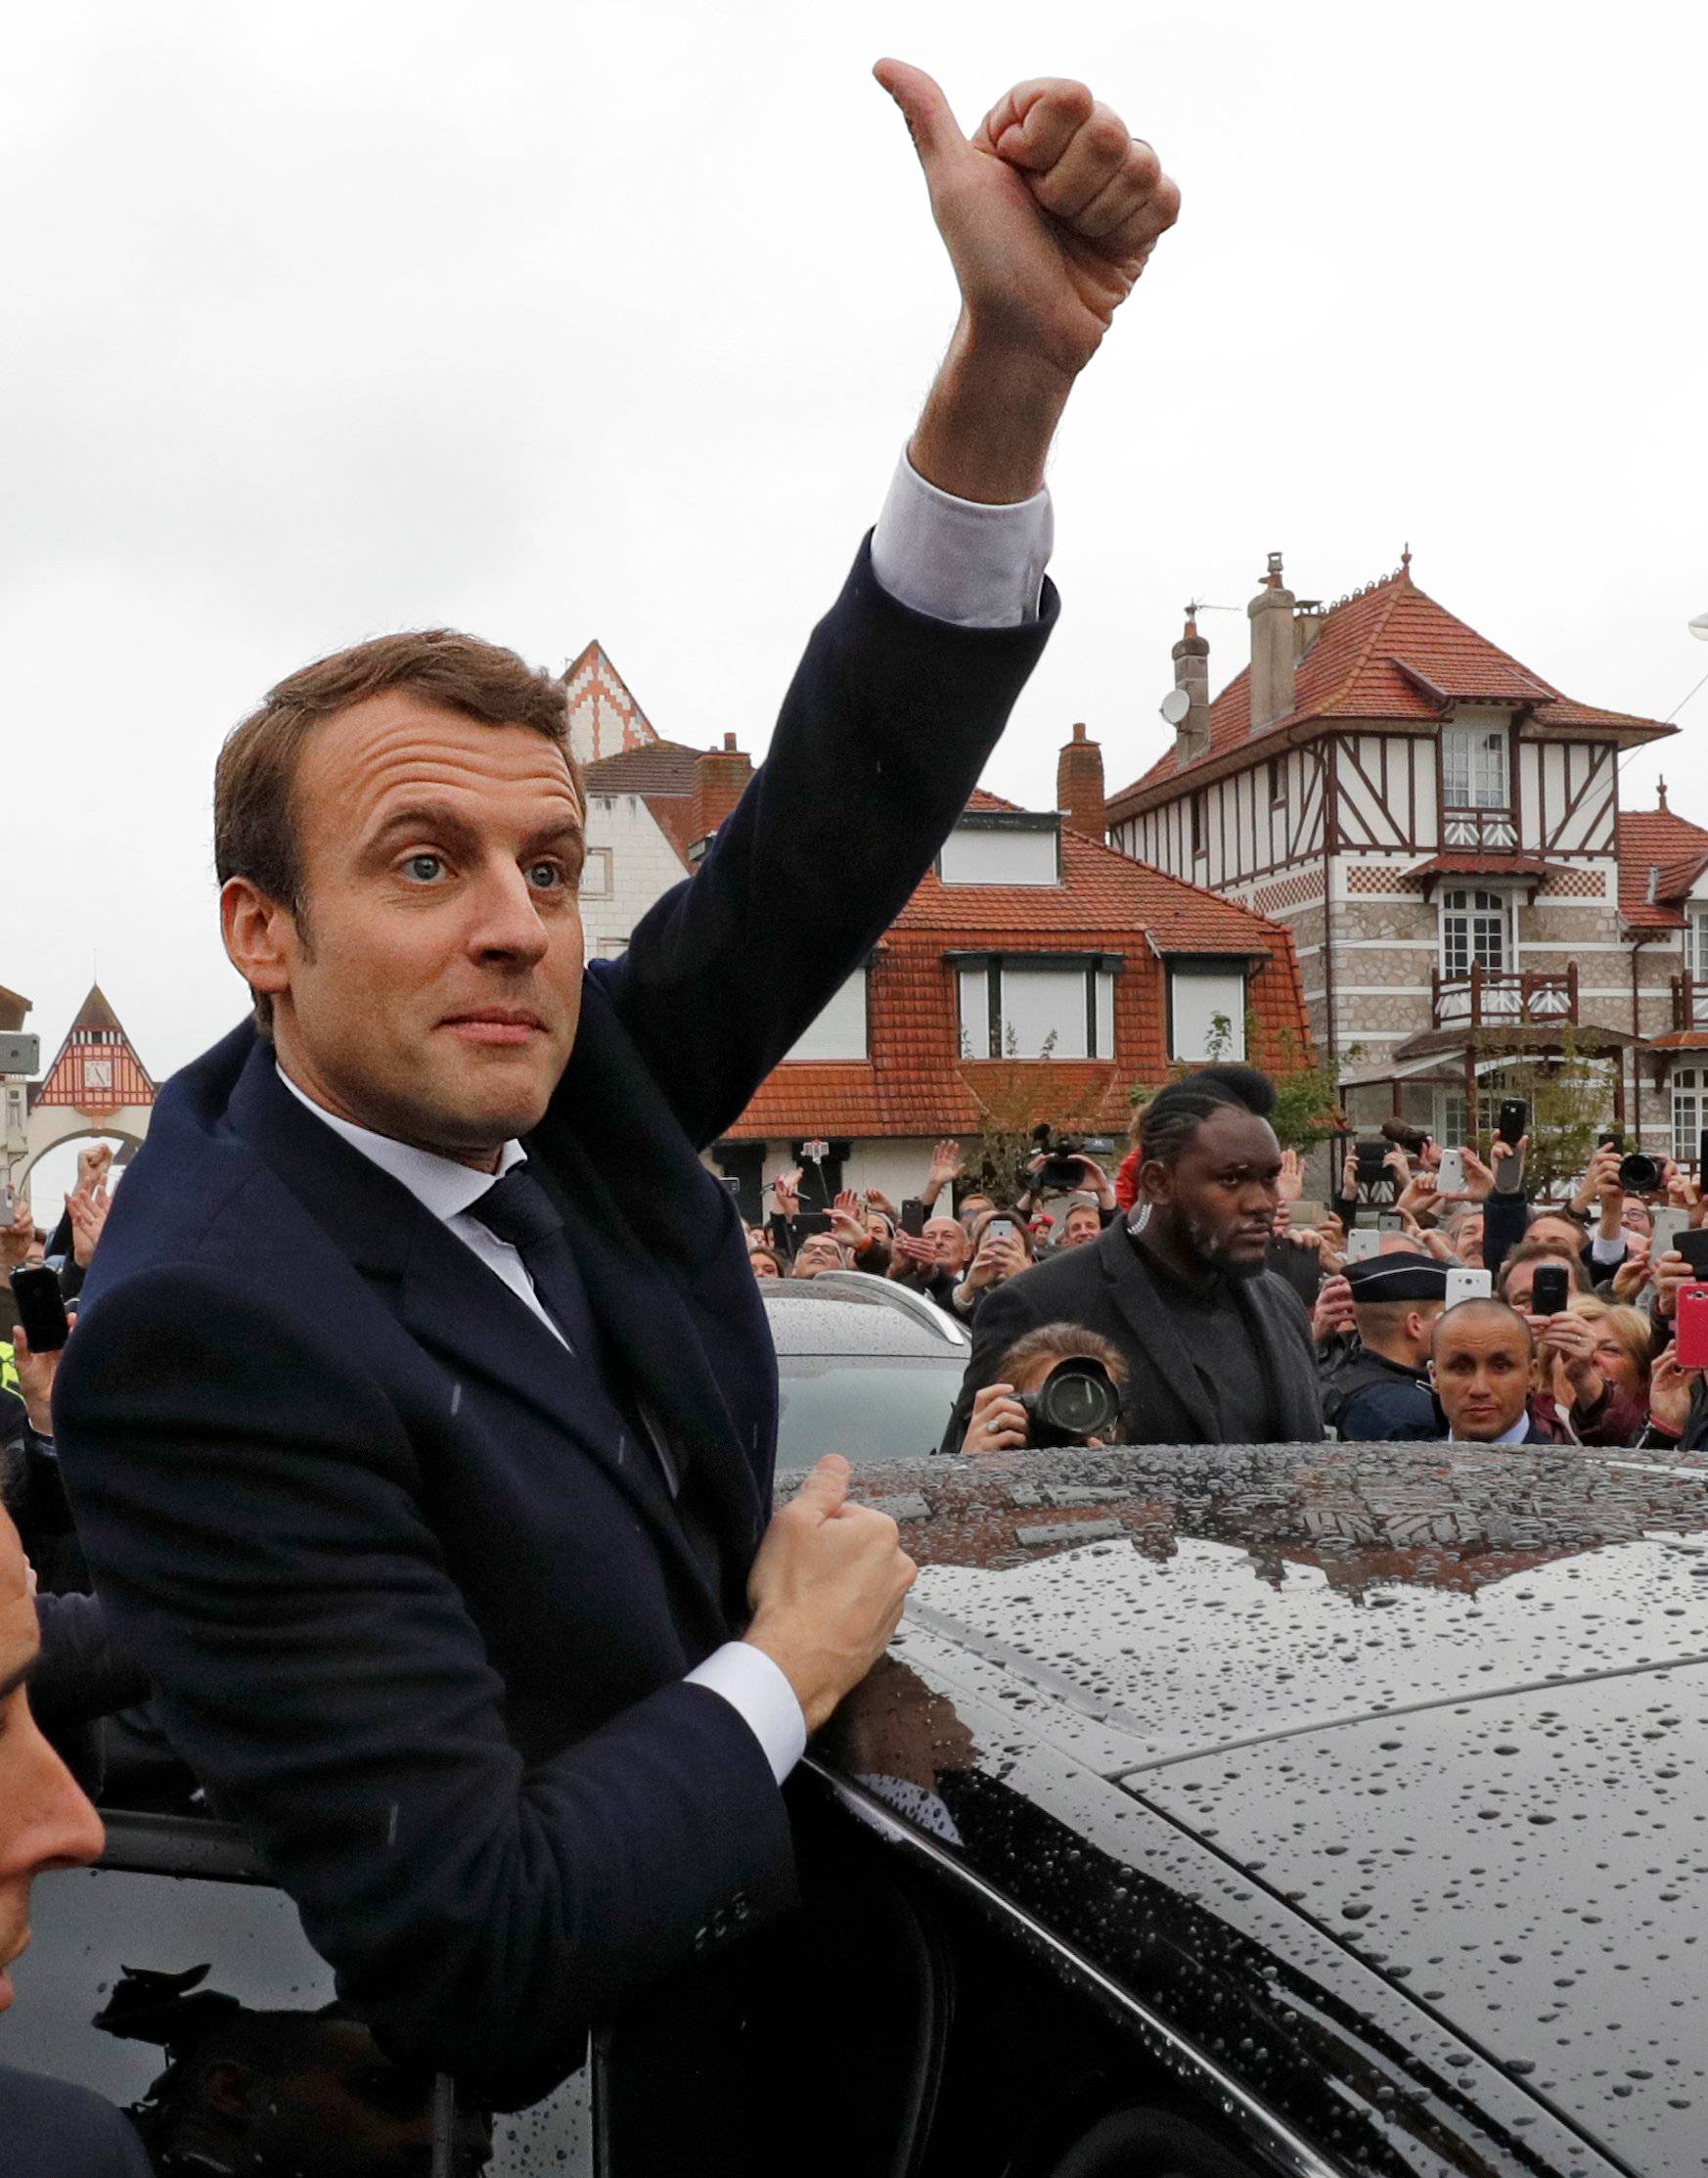 French presidential election candidate Emmanuel Macron gives thumb up to supporters as he leaves a polling station after voting in the second round of 2017 French presidential election, in Le Touquet